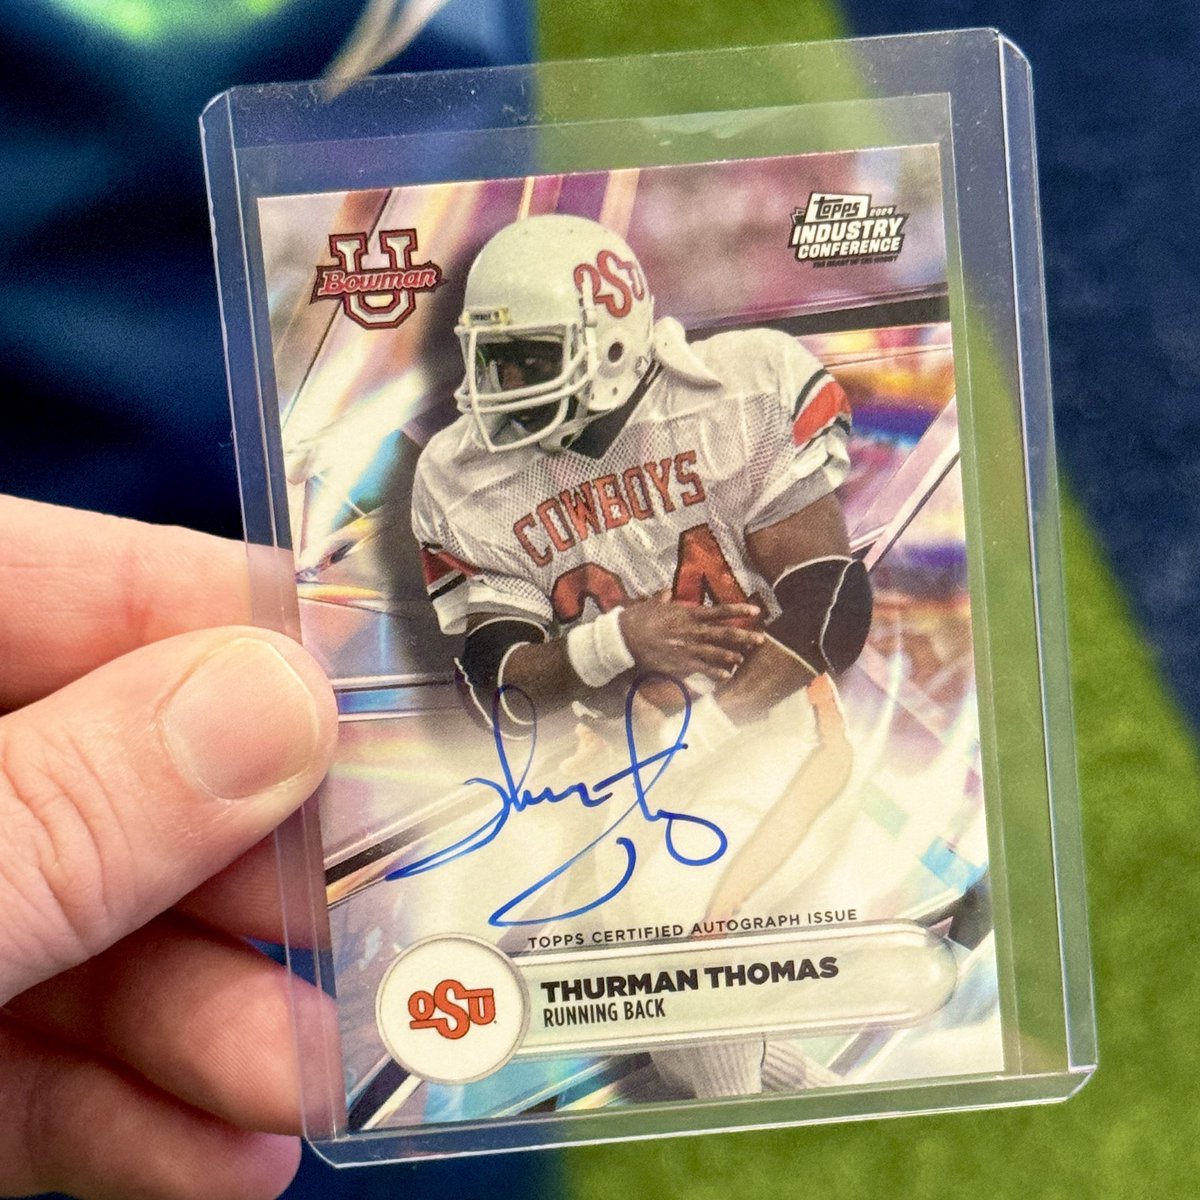 You know we gotta pass along some prizes! 🏆 RETWEET & FOLLOW for your chance to win this Thurman Thomas 2024 autographed Topps Industry Conference trading card! @Topps #Topps #TheHobby